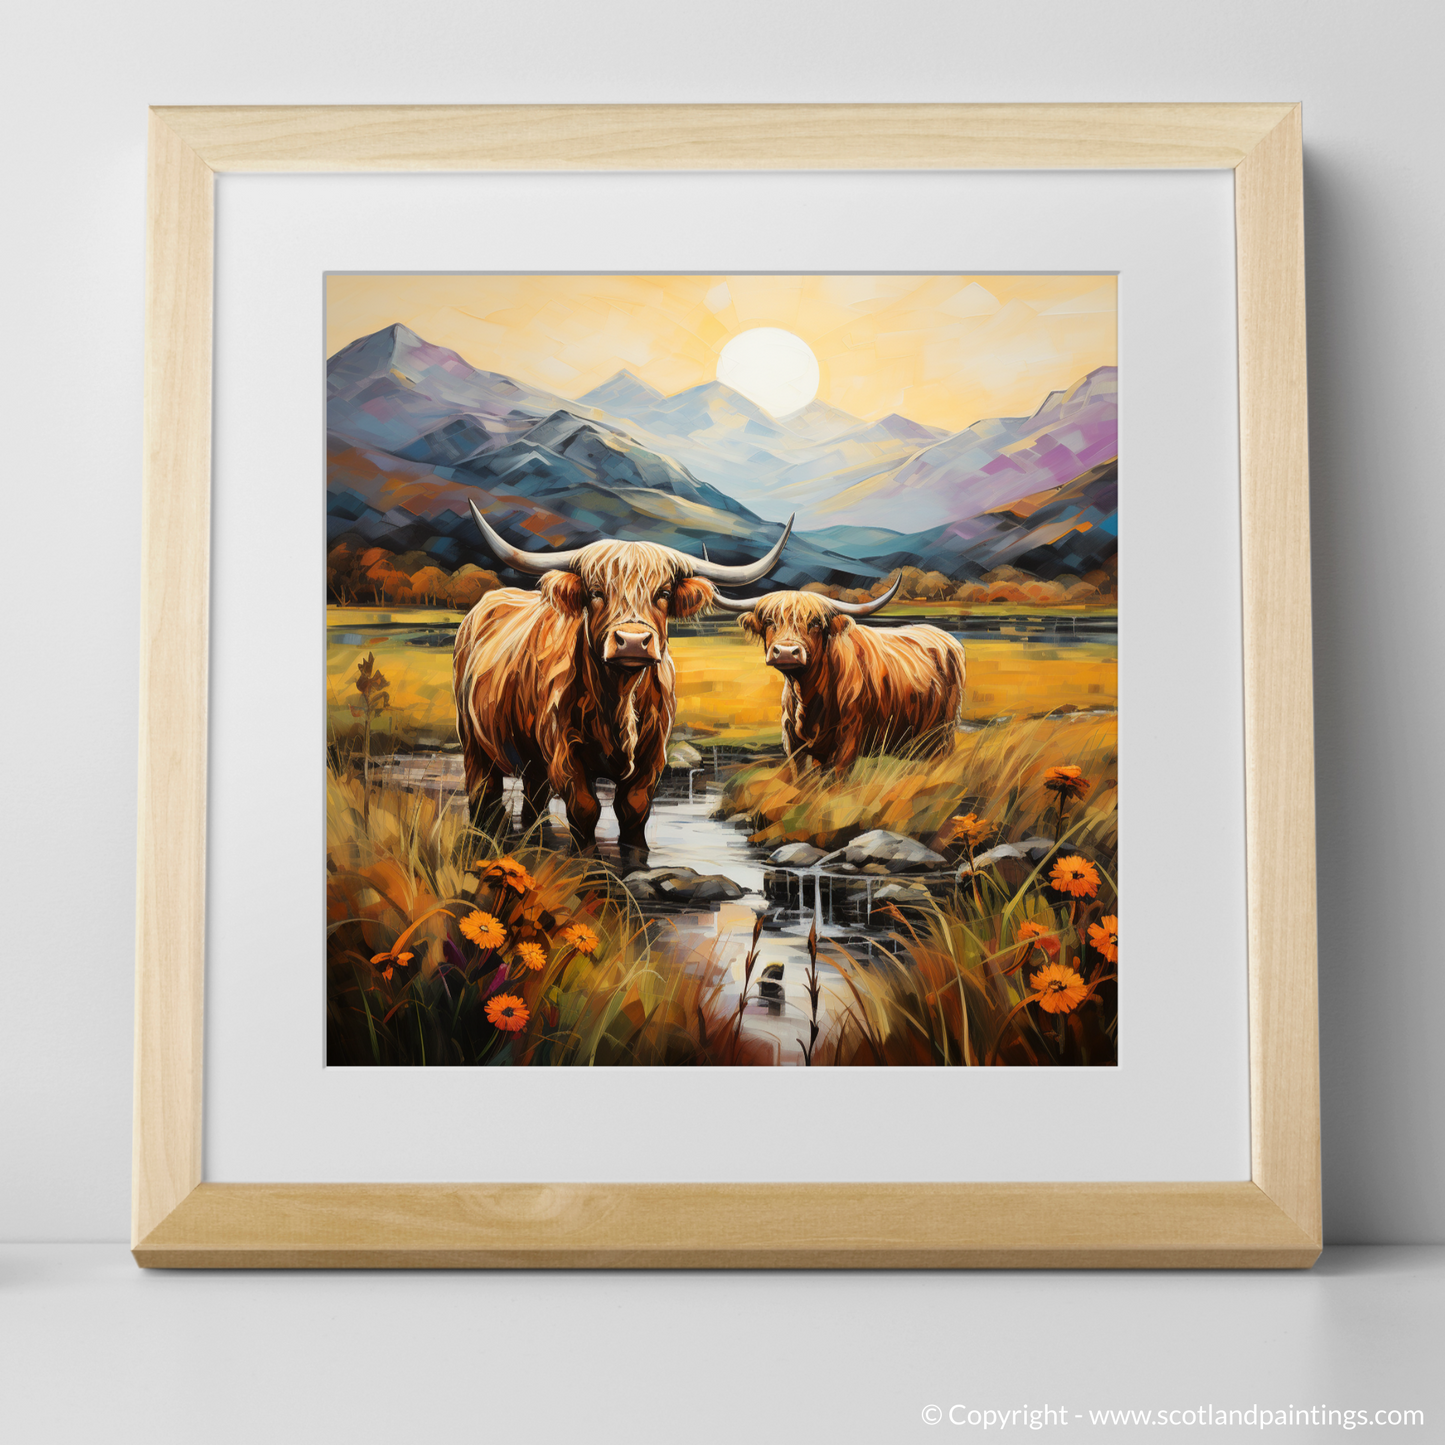 Highland Serenity: An Art Nouveau Tribute to Glencoe's Majestic Cows